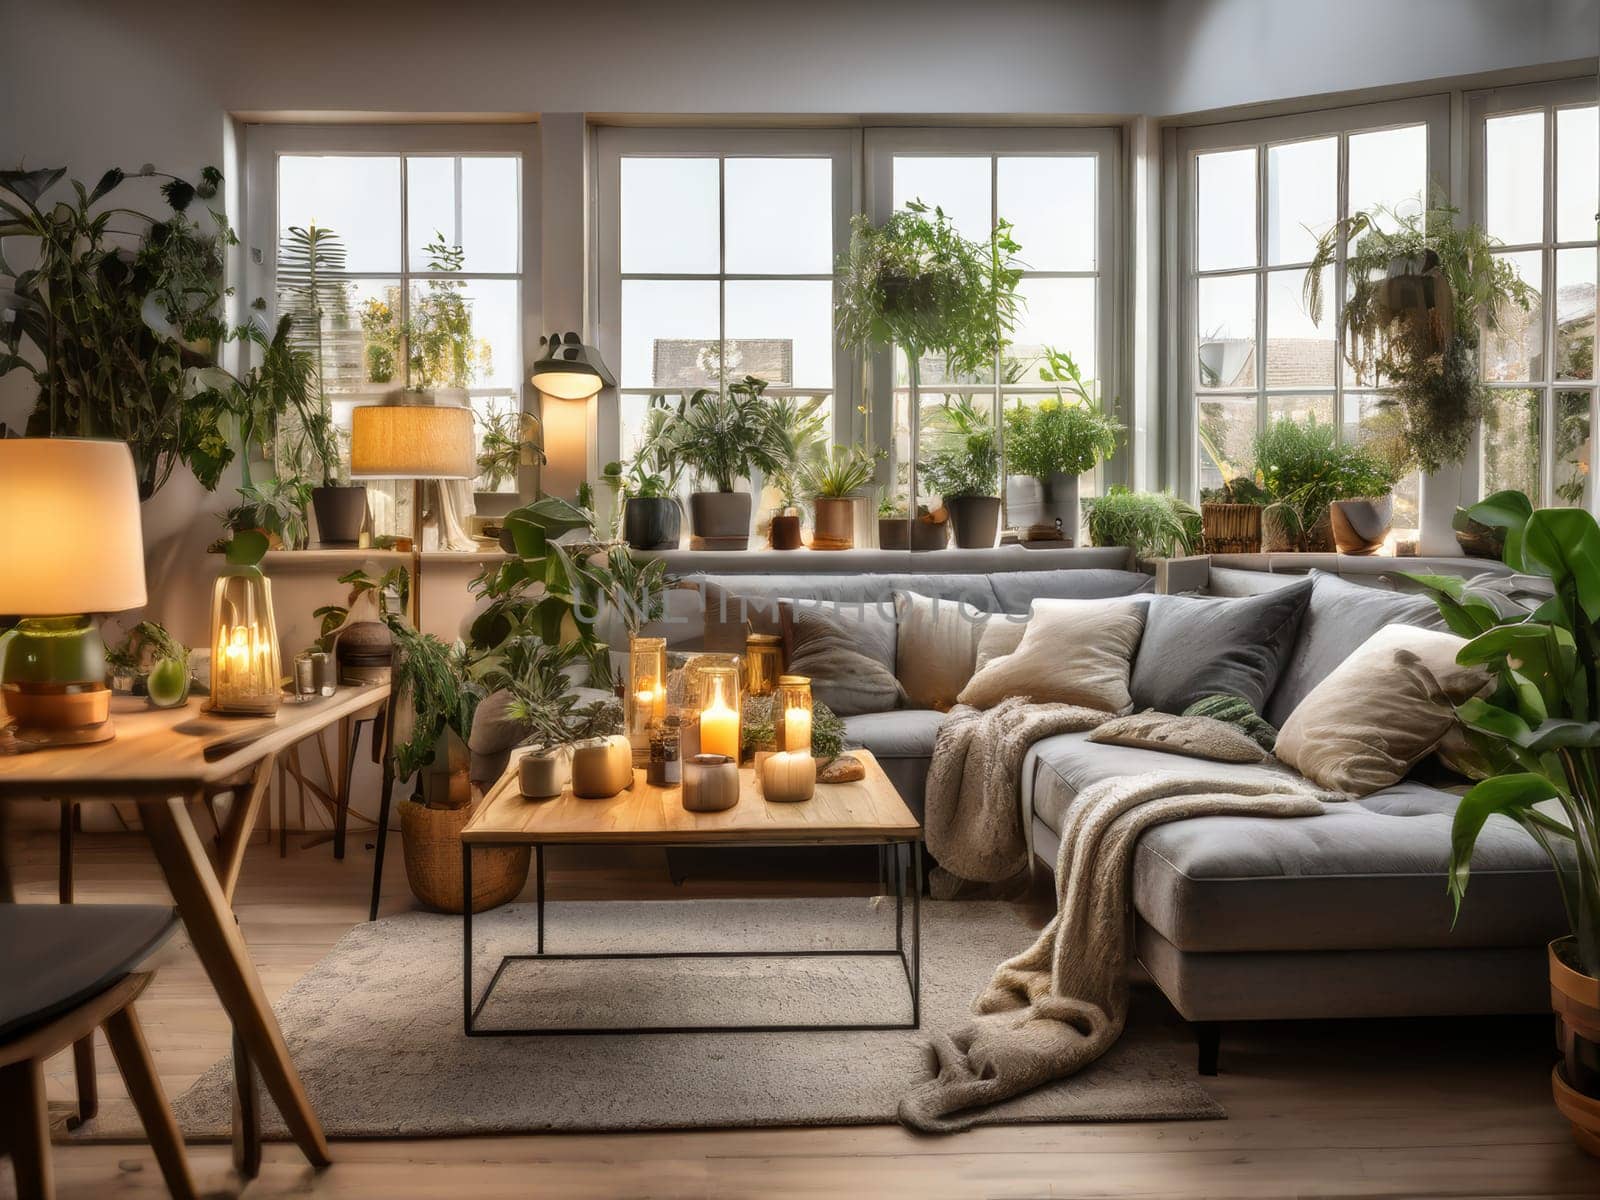 Urban jungle in living room interior. Scandinavian and boho style cozy living room interior with many natural potted plants. Writing desk and chair in room with green plants